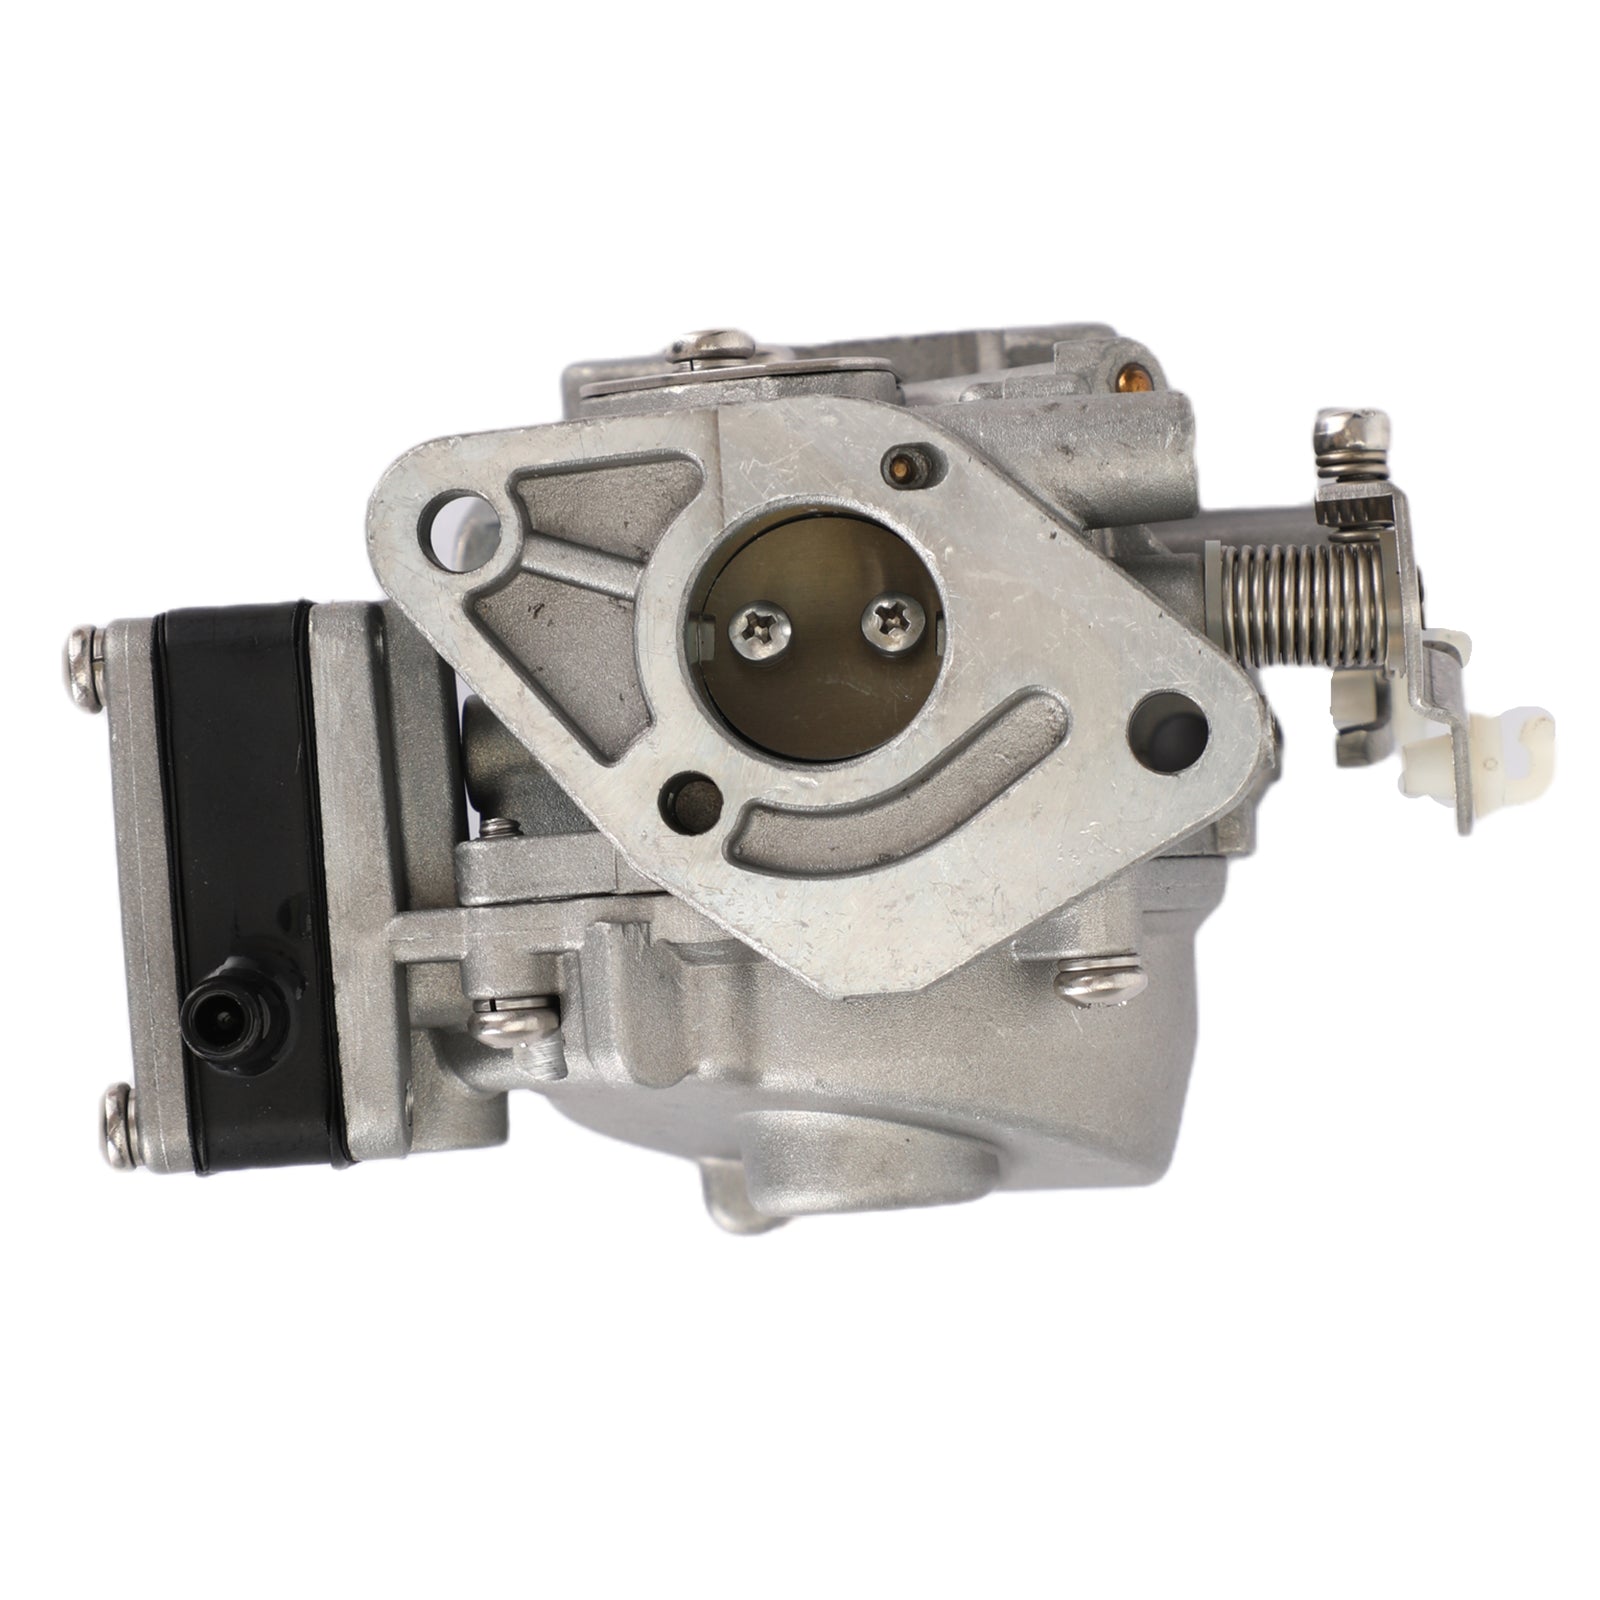 Carburetor Carb fit for TOHATSU outboard 9.8HP 2-strokes engine 3B2-03200-1